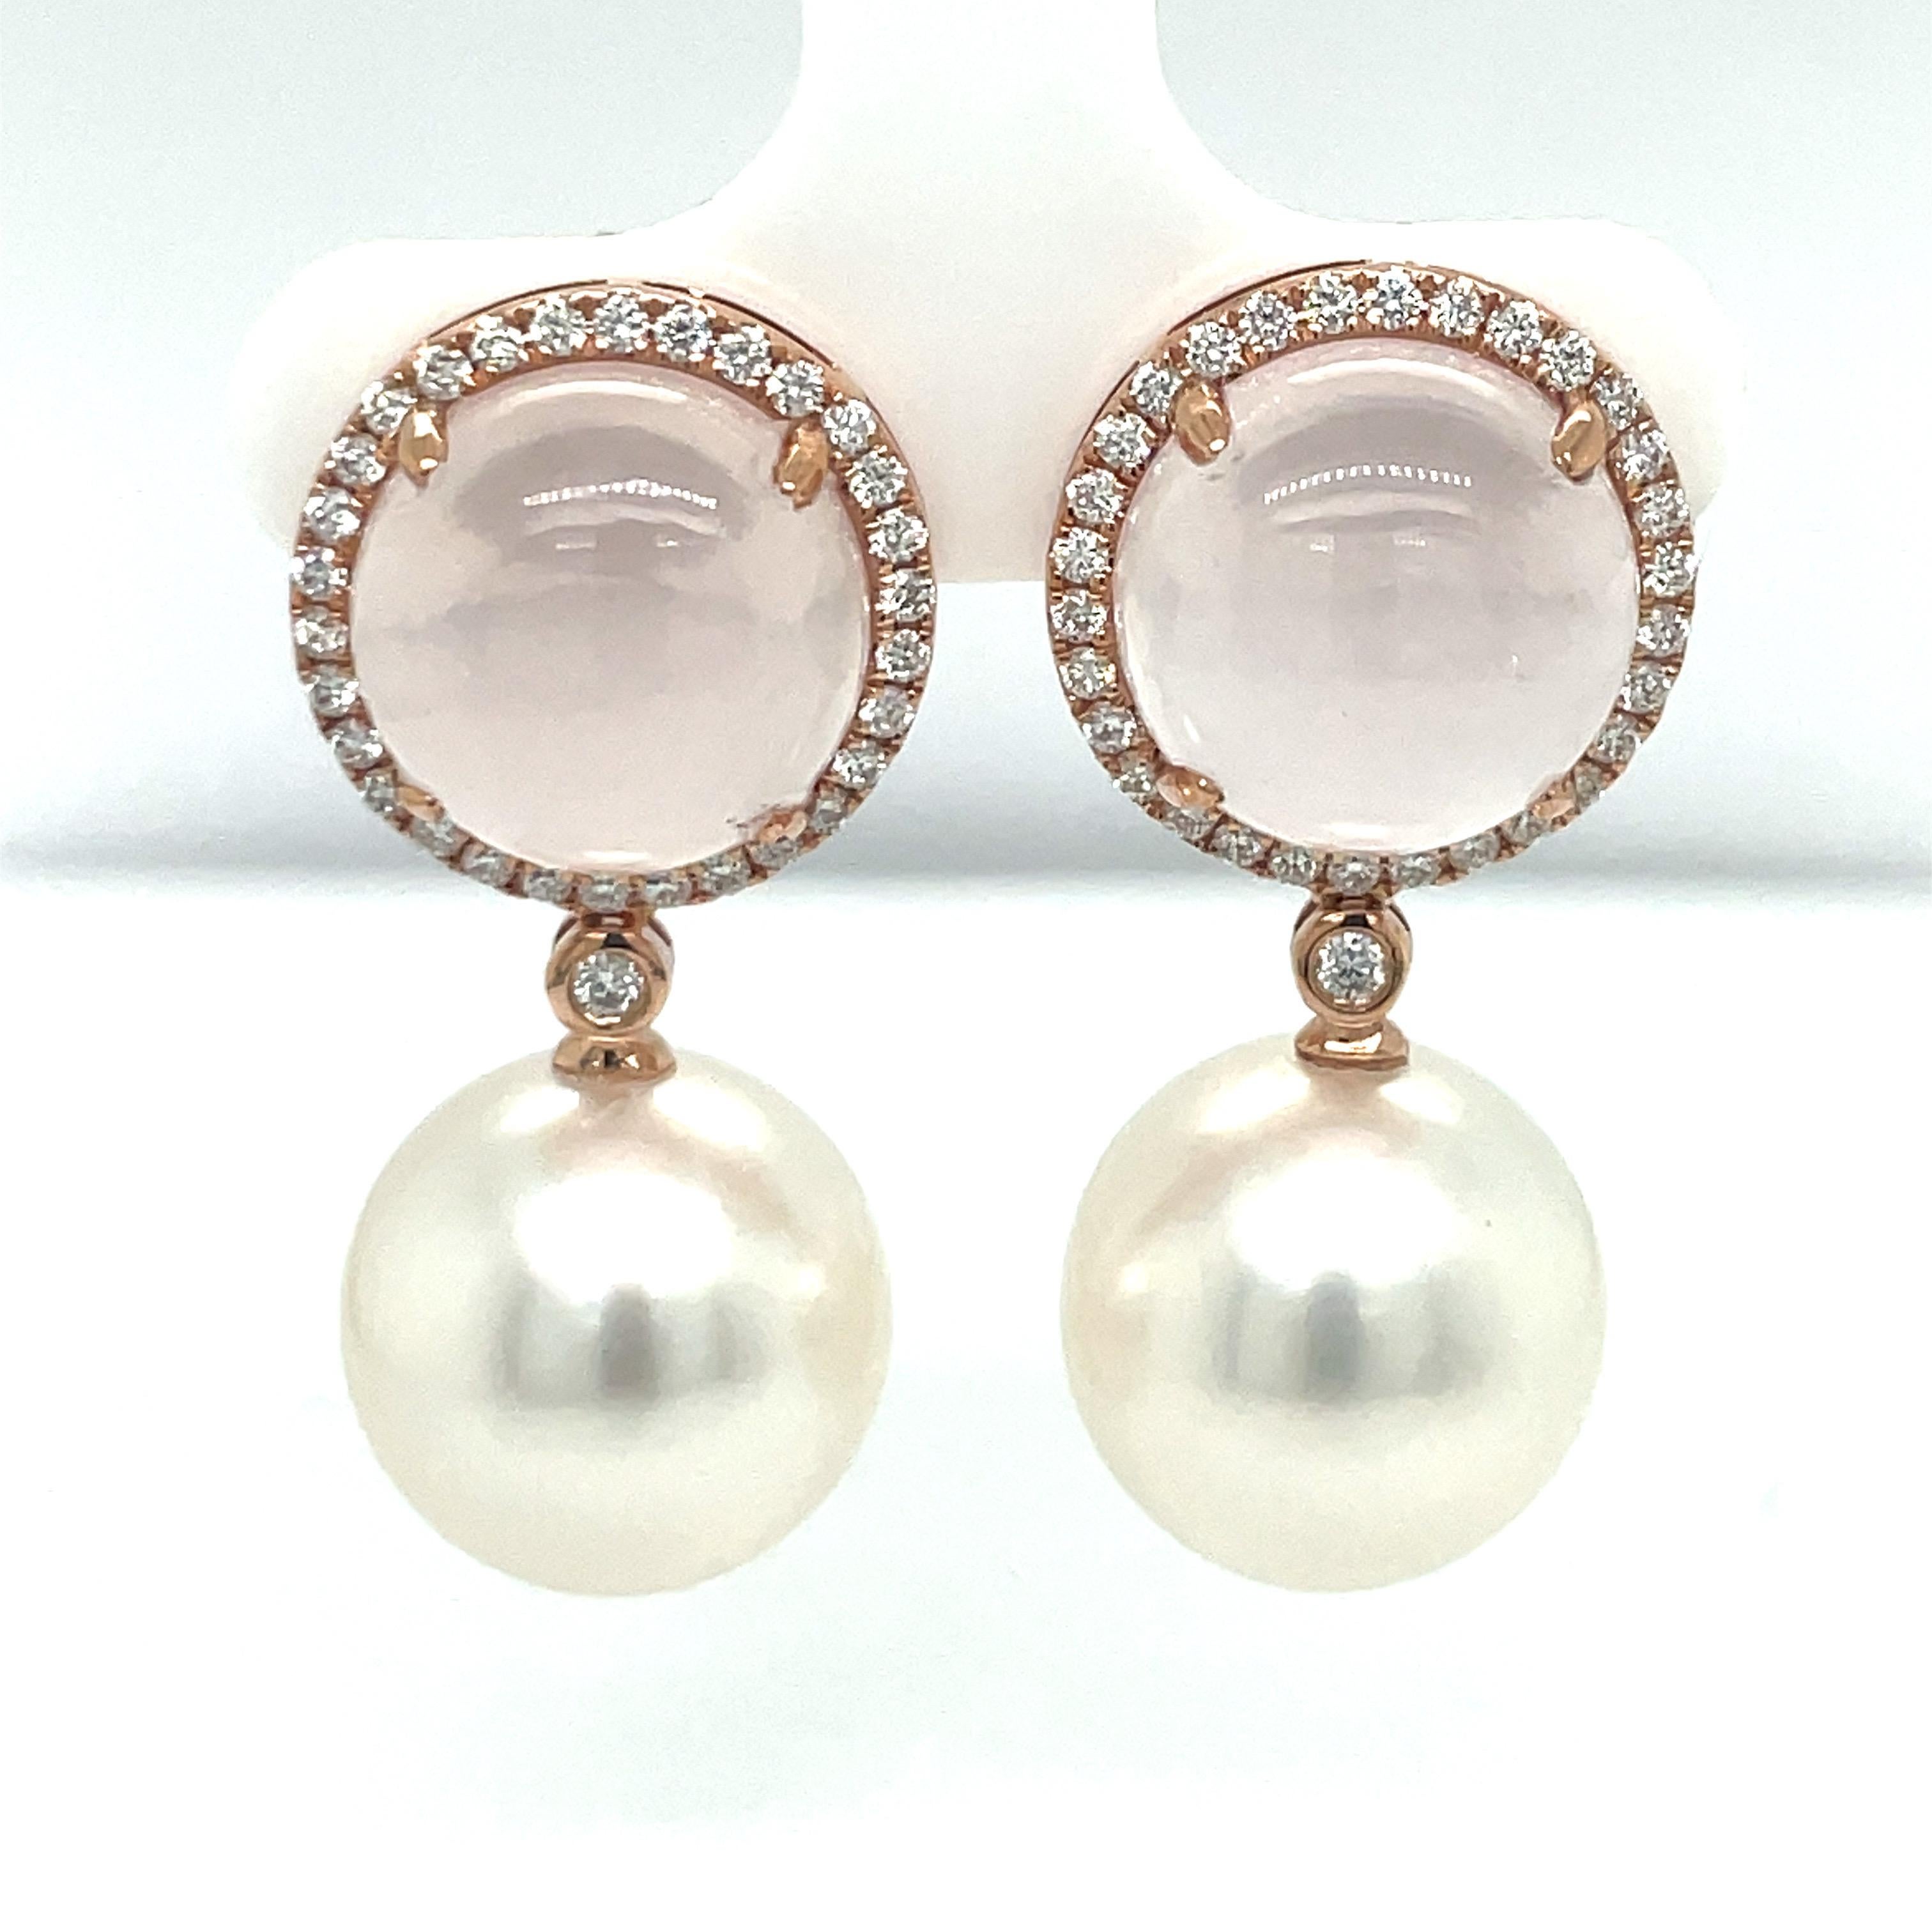 18 Karat Rose Gold drop earrings featuring two round Rose Quartz weighing 11.69 Carats surrounded by 62 round brilliants weighing 0.51 Carats and two South Sea Pearls measuring 13-14 MM.
Can customize Pearl color. 